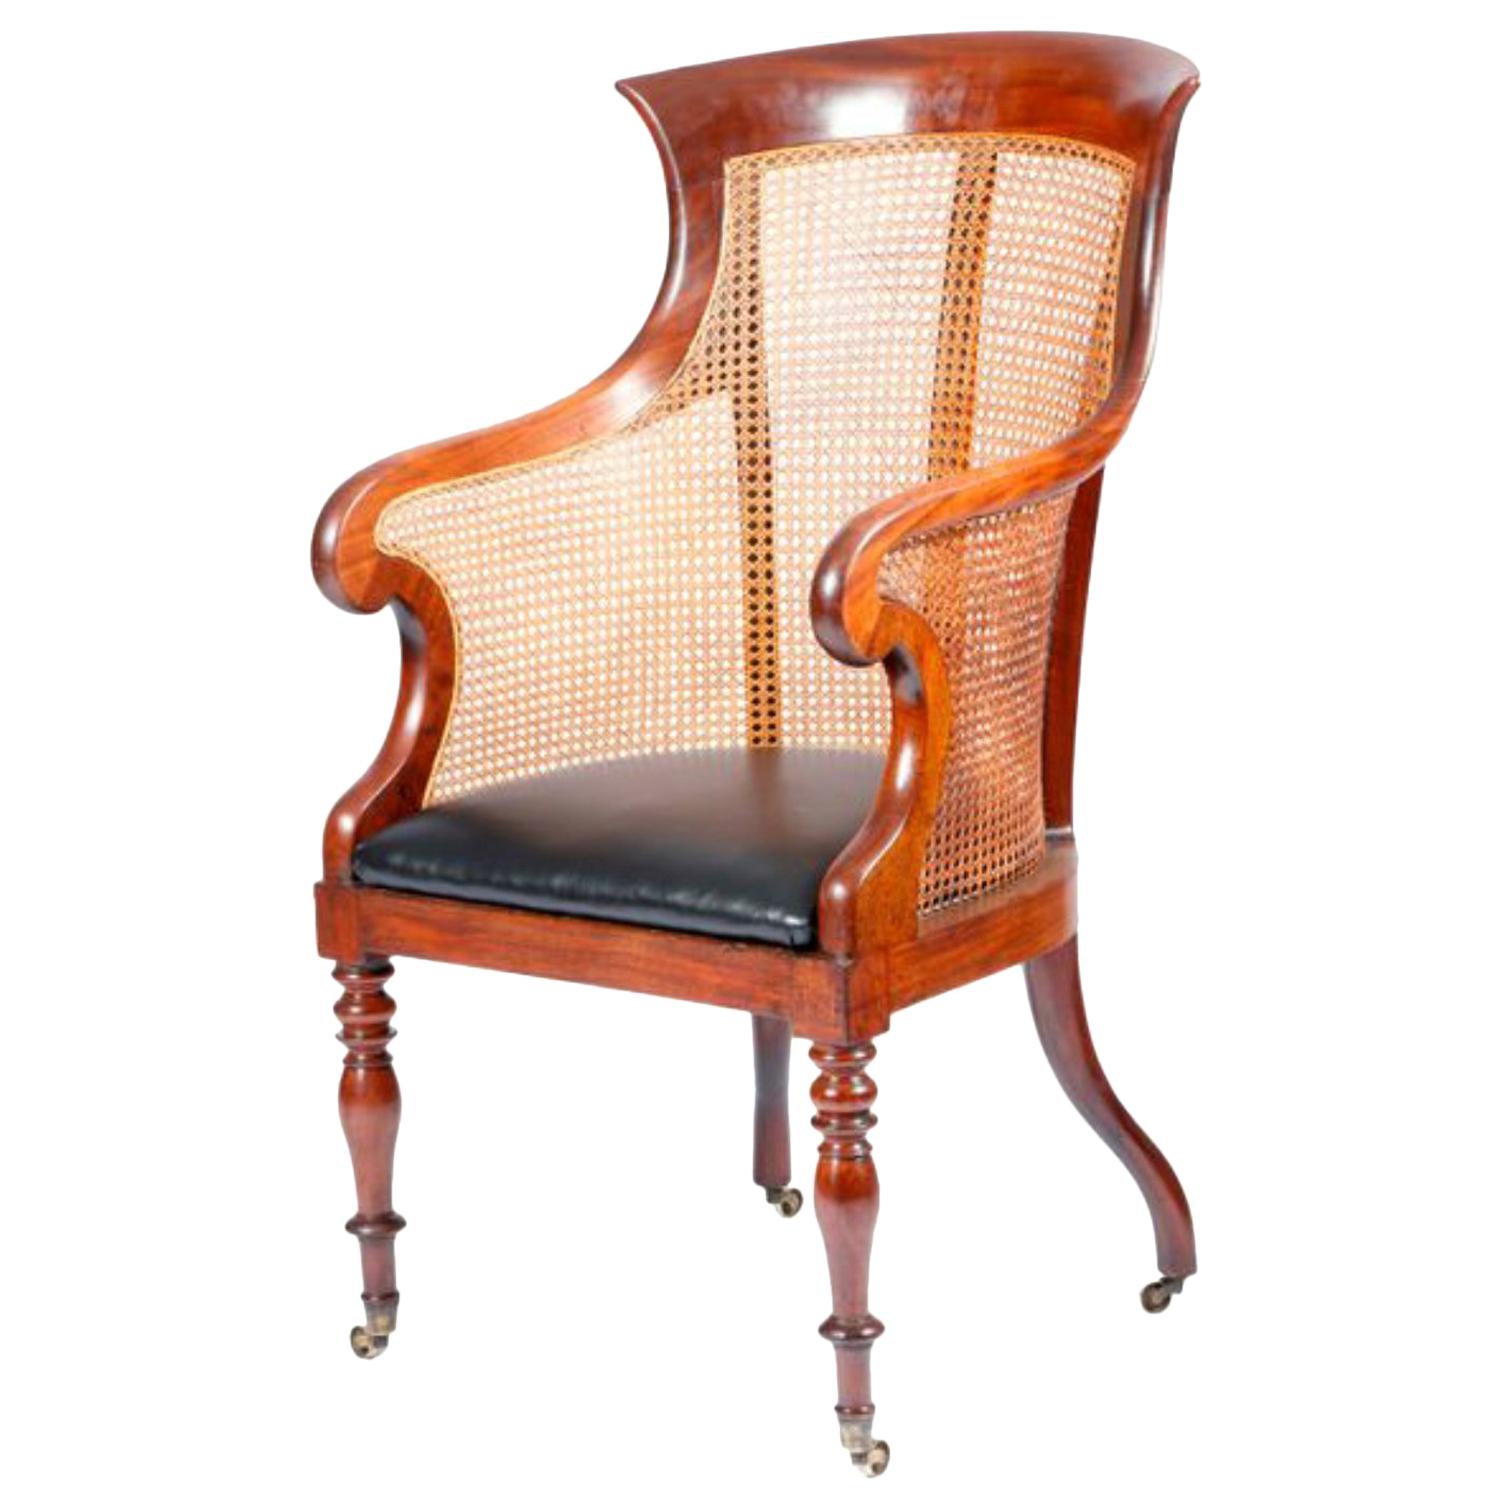 19th Century English Victorian Mahogany Library Chair with Caned Back and Sides